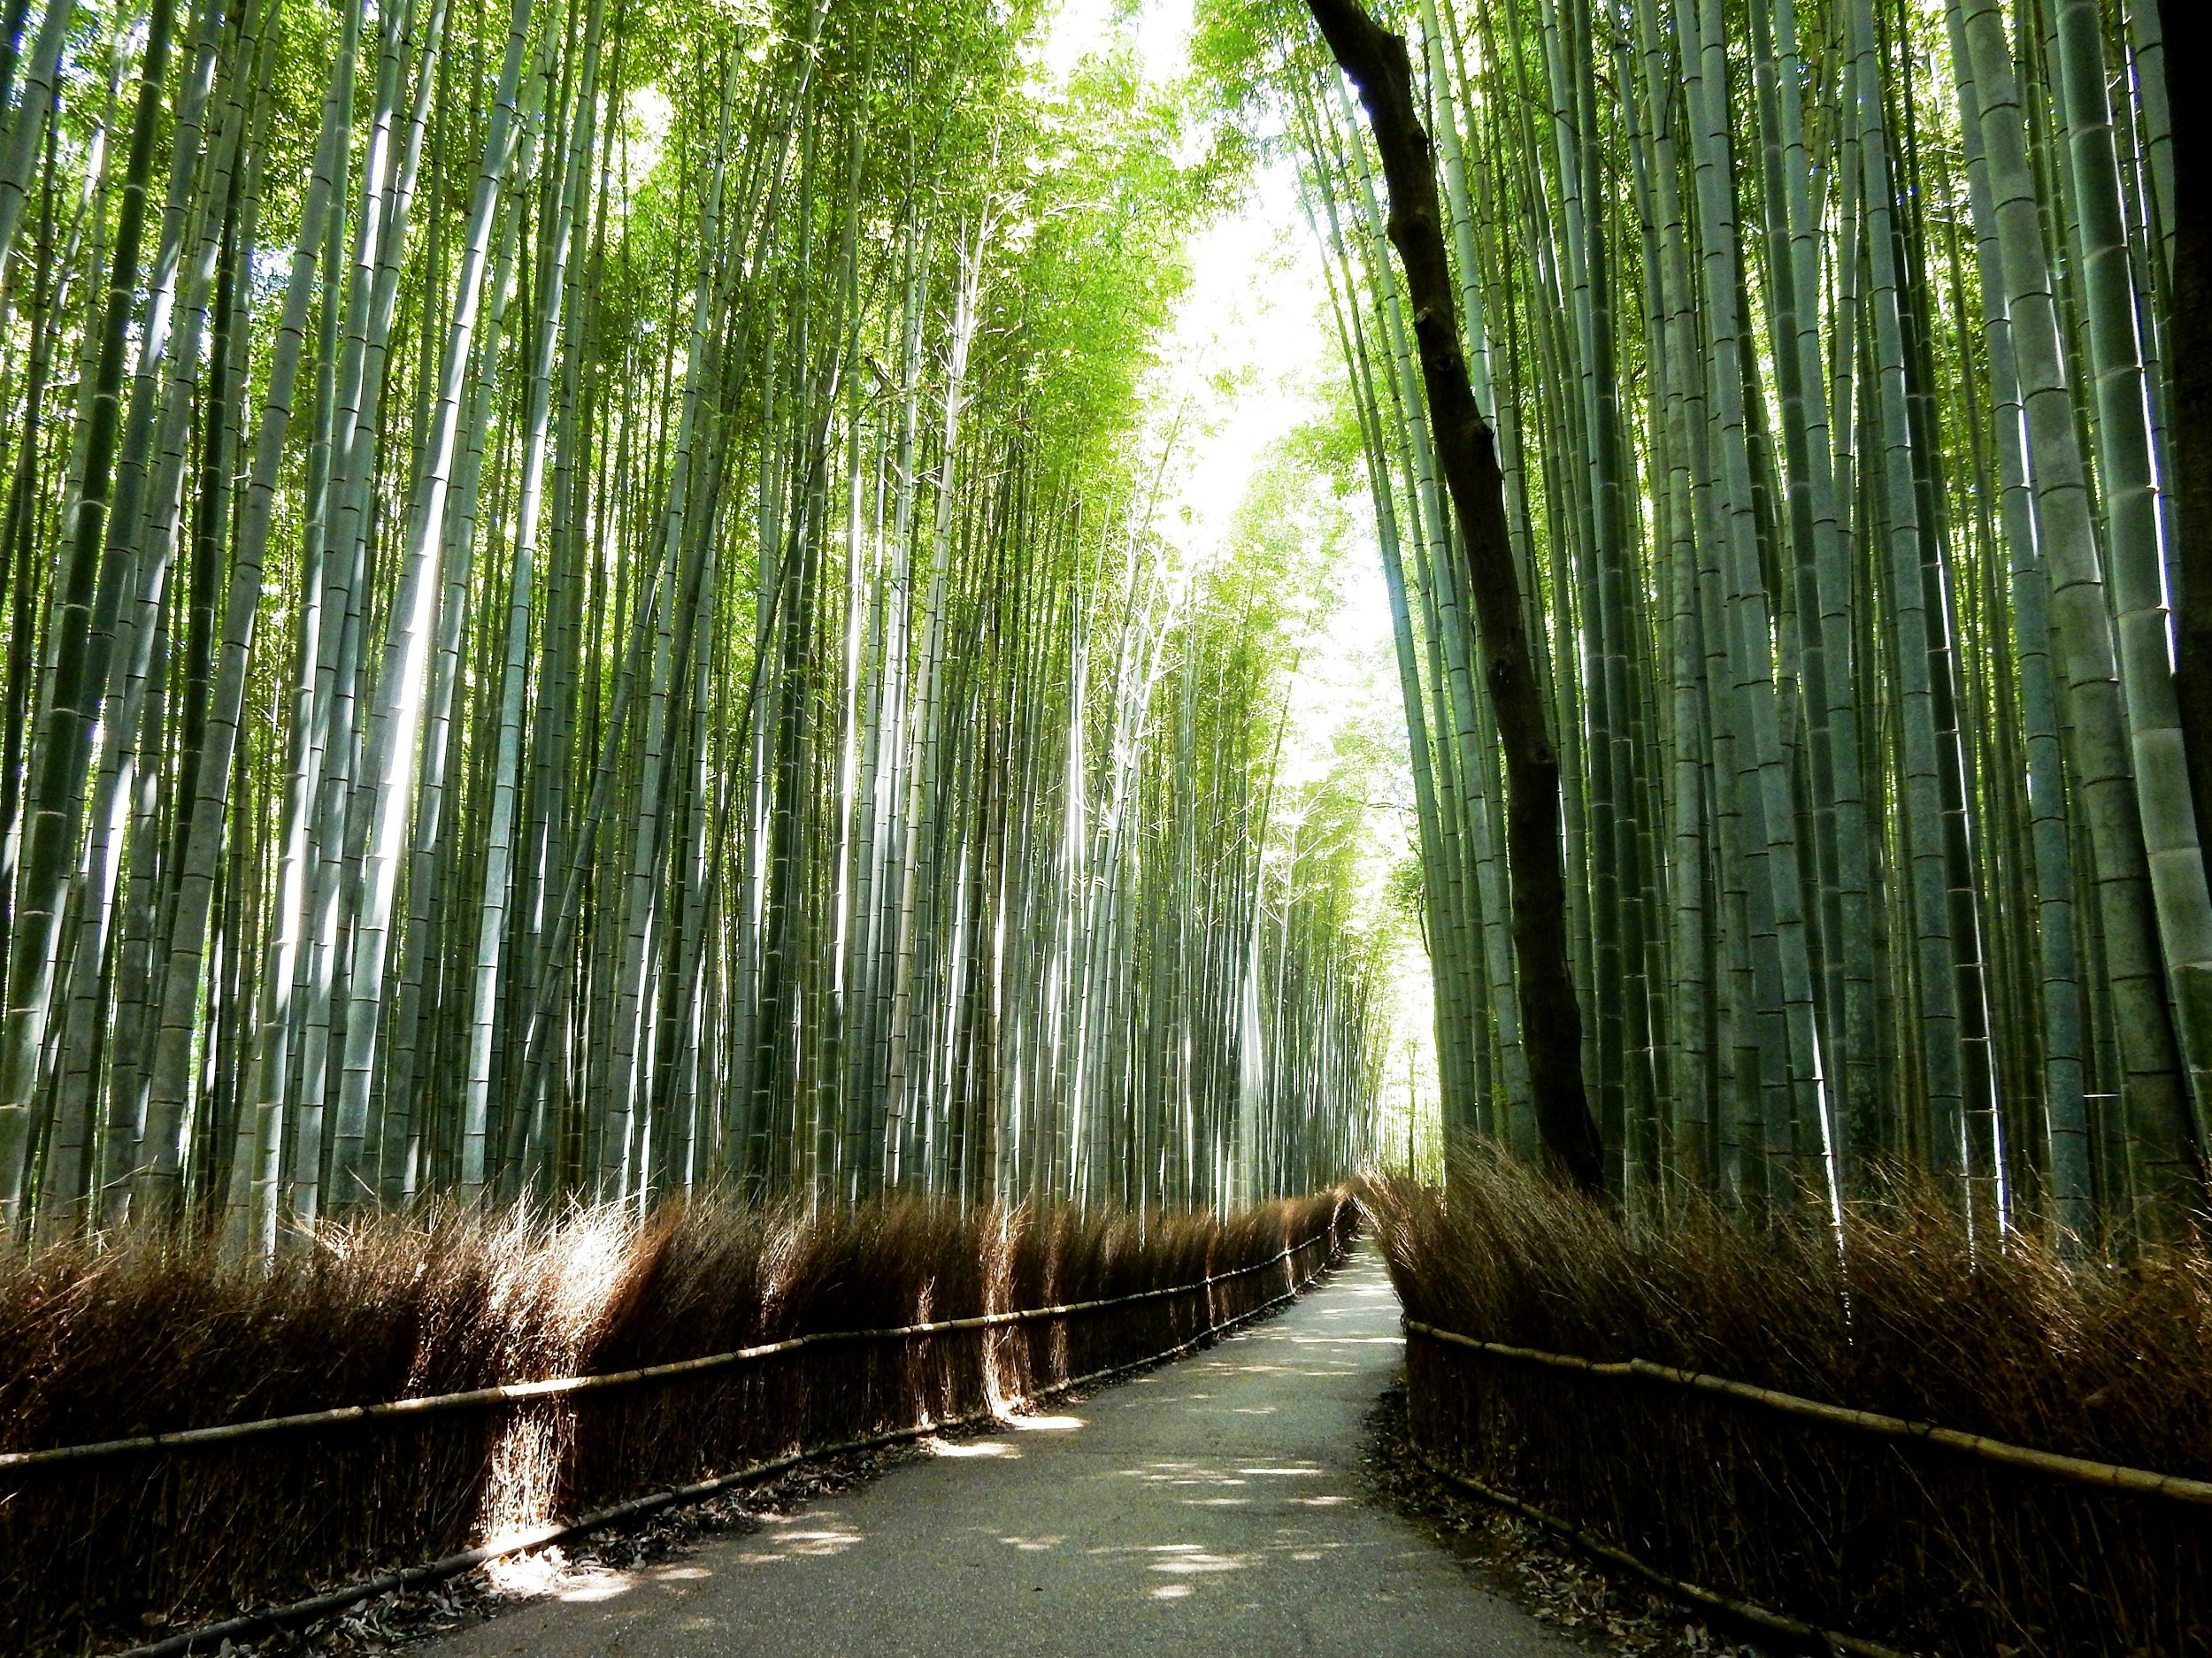 Stands of towering bamboo line a walking path.